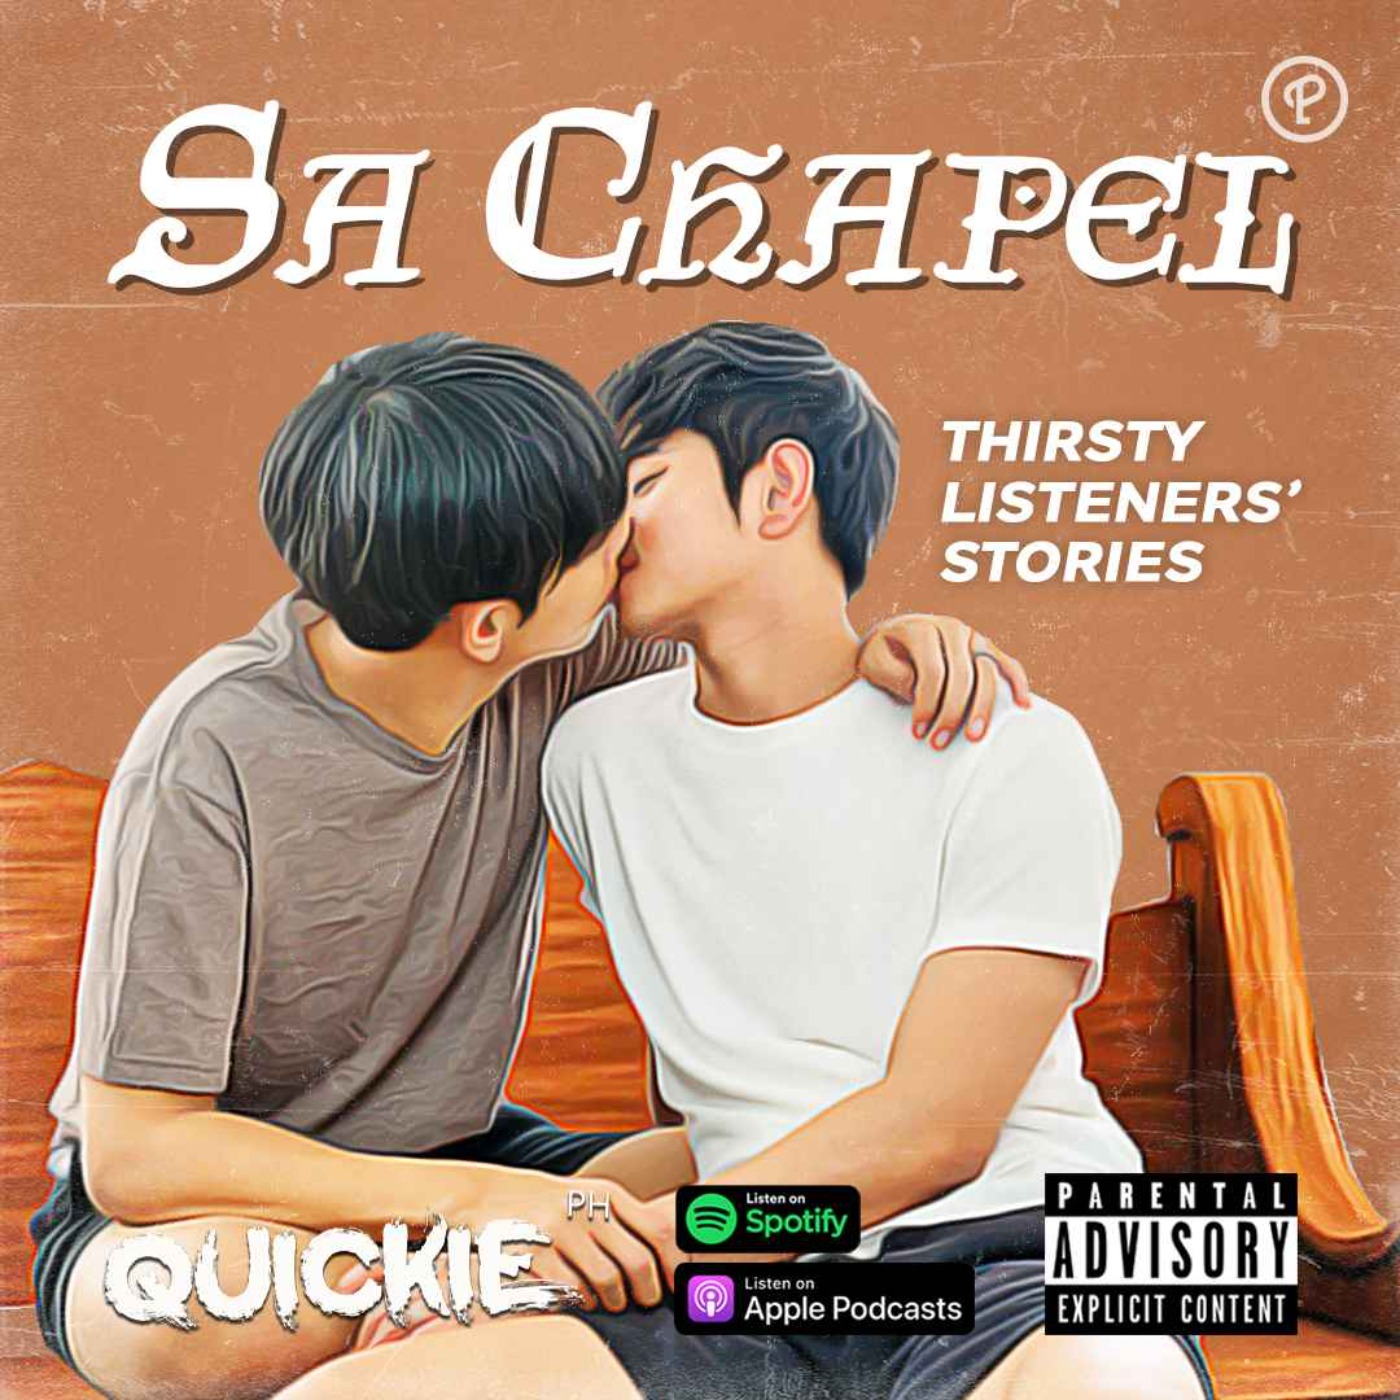 Thirsty Listeners' Stories #48 Sa Chapel